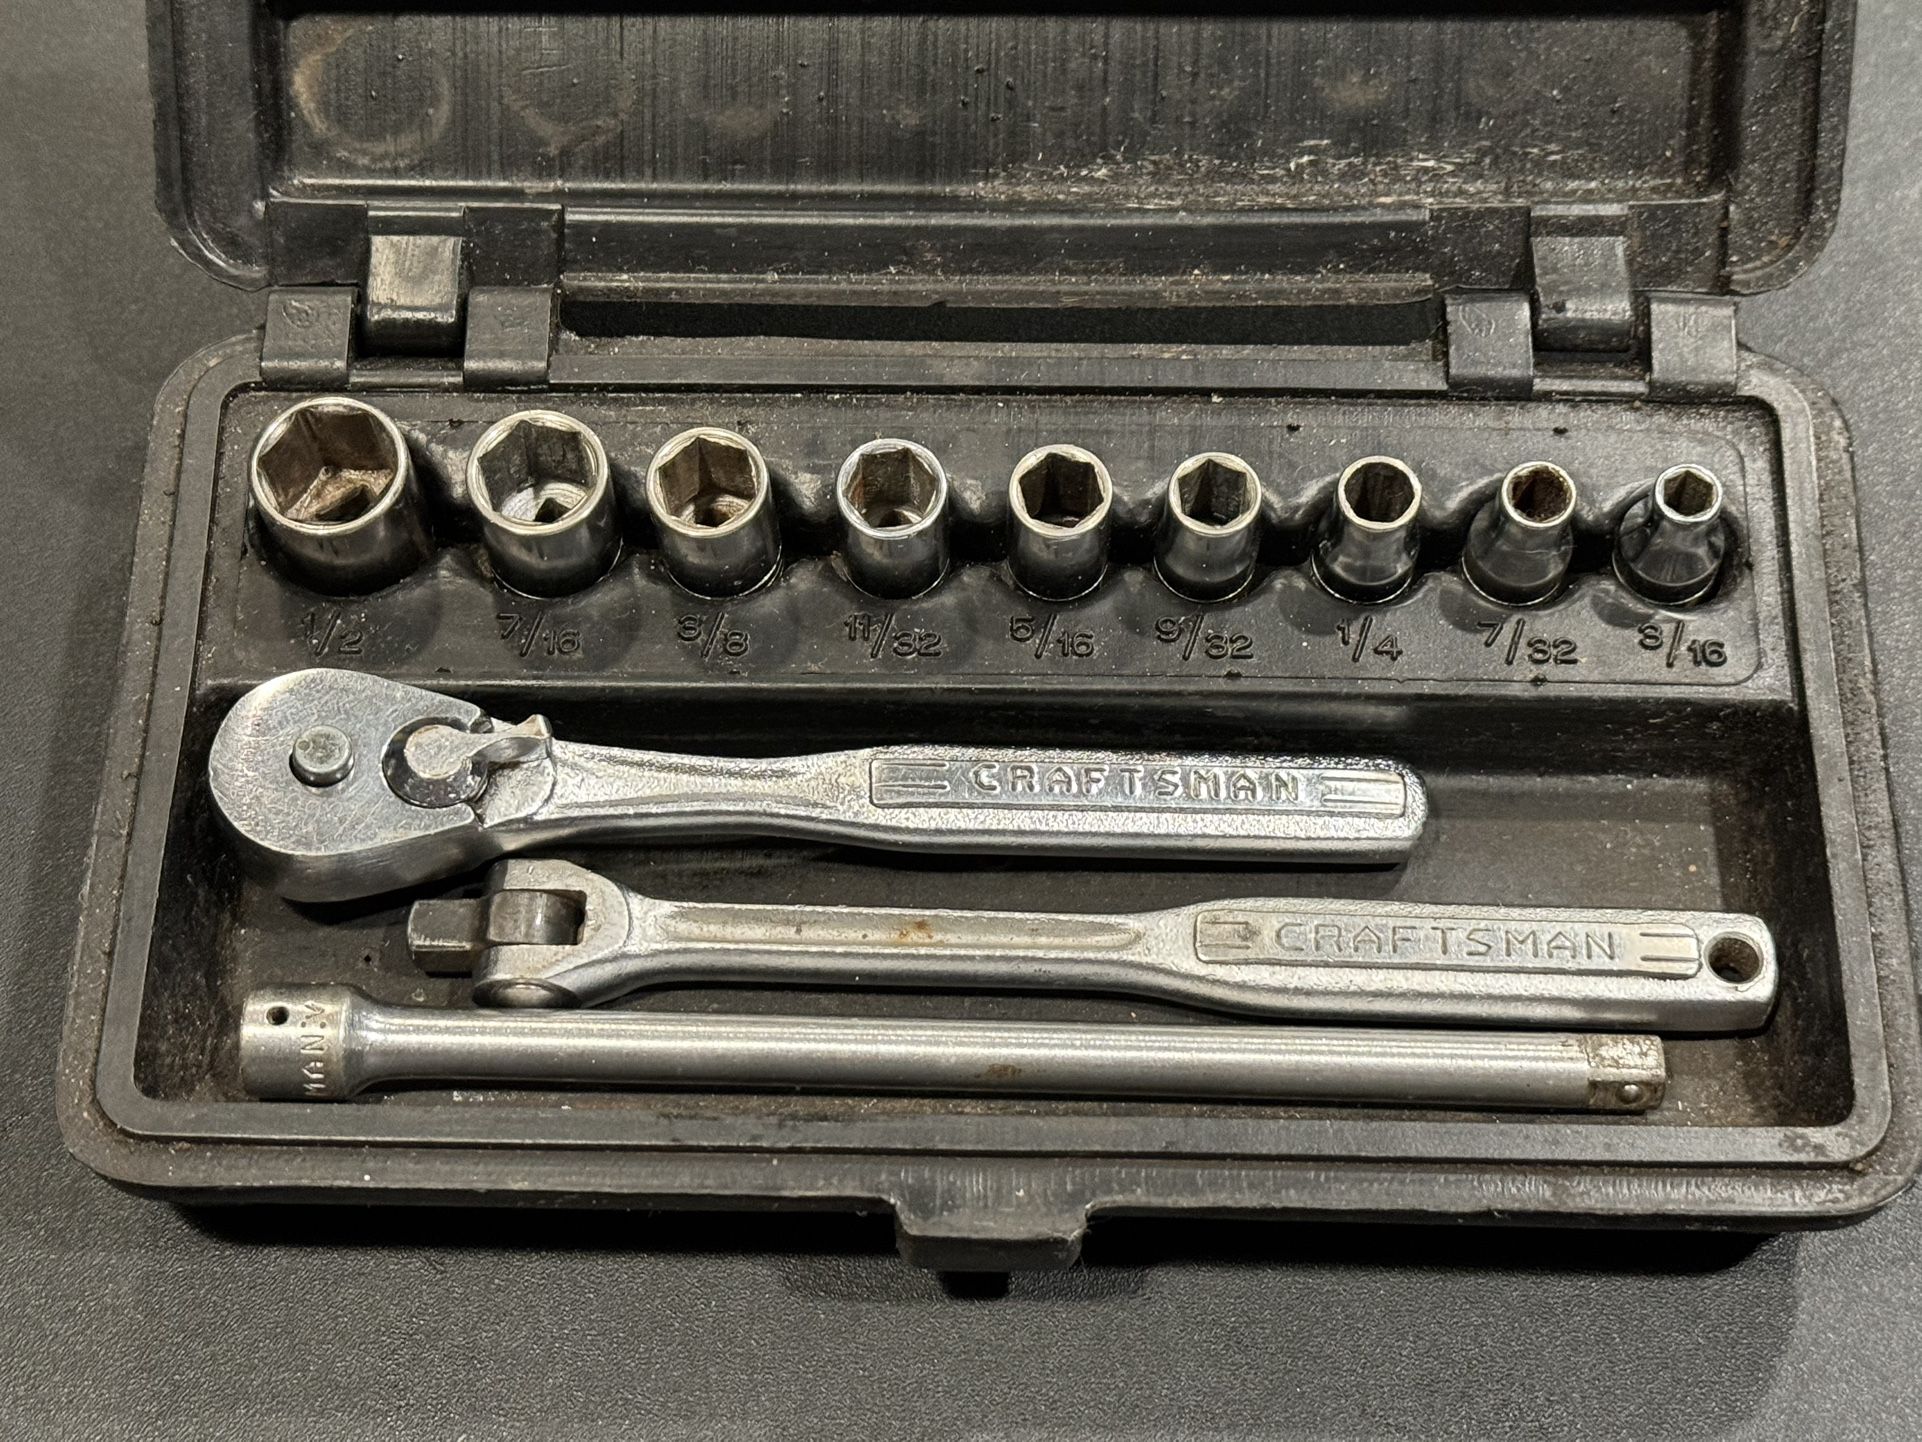 Vintage Craftsman 1/4” drive socket set in permamex case. ALL USA. Ratchet has owners marks. Sockets and ratchet are V series.